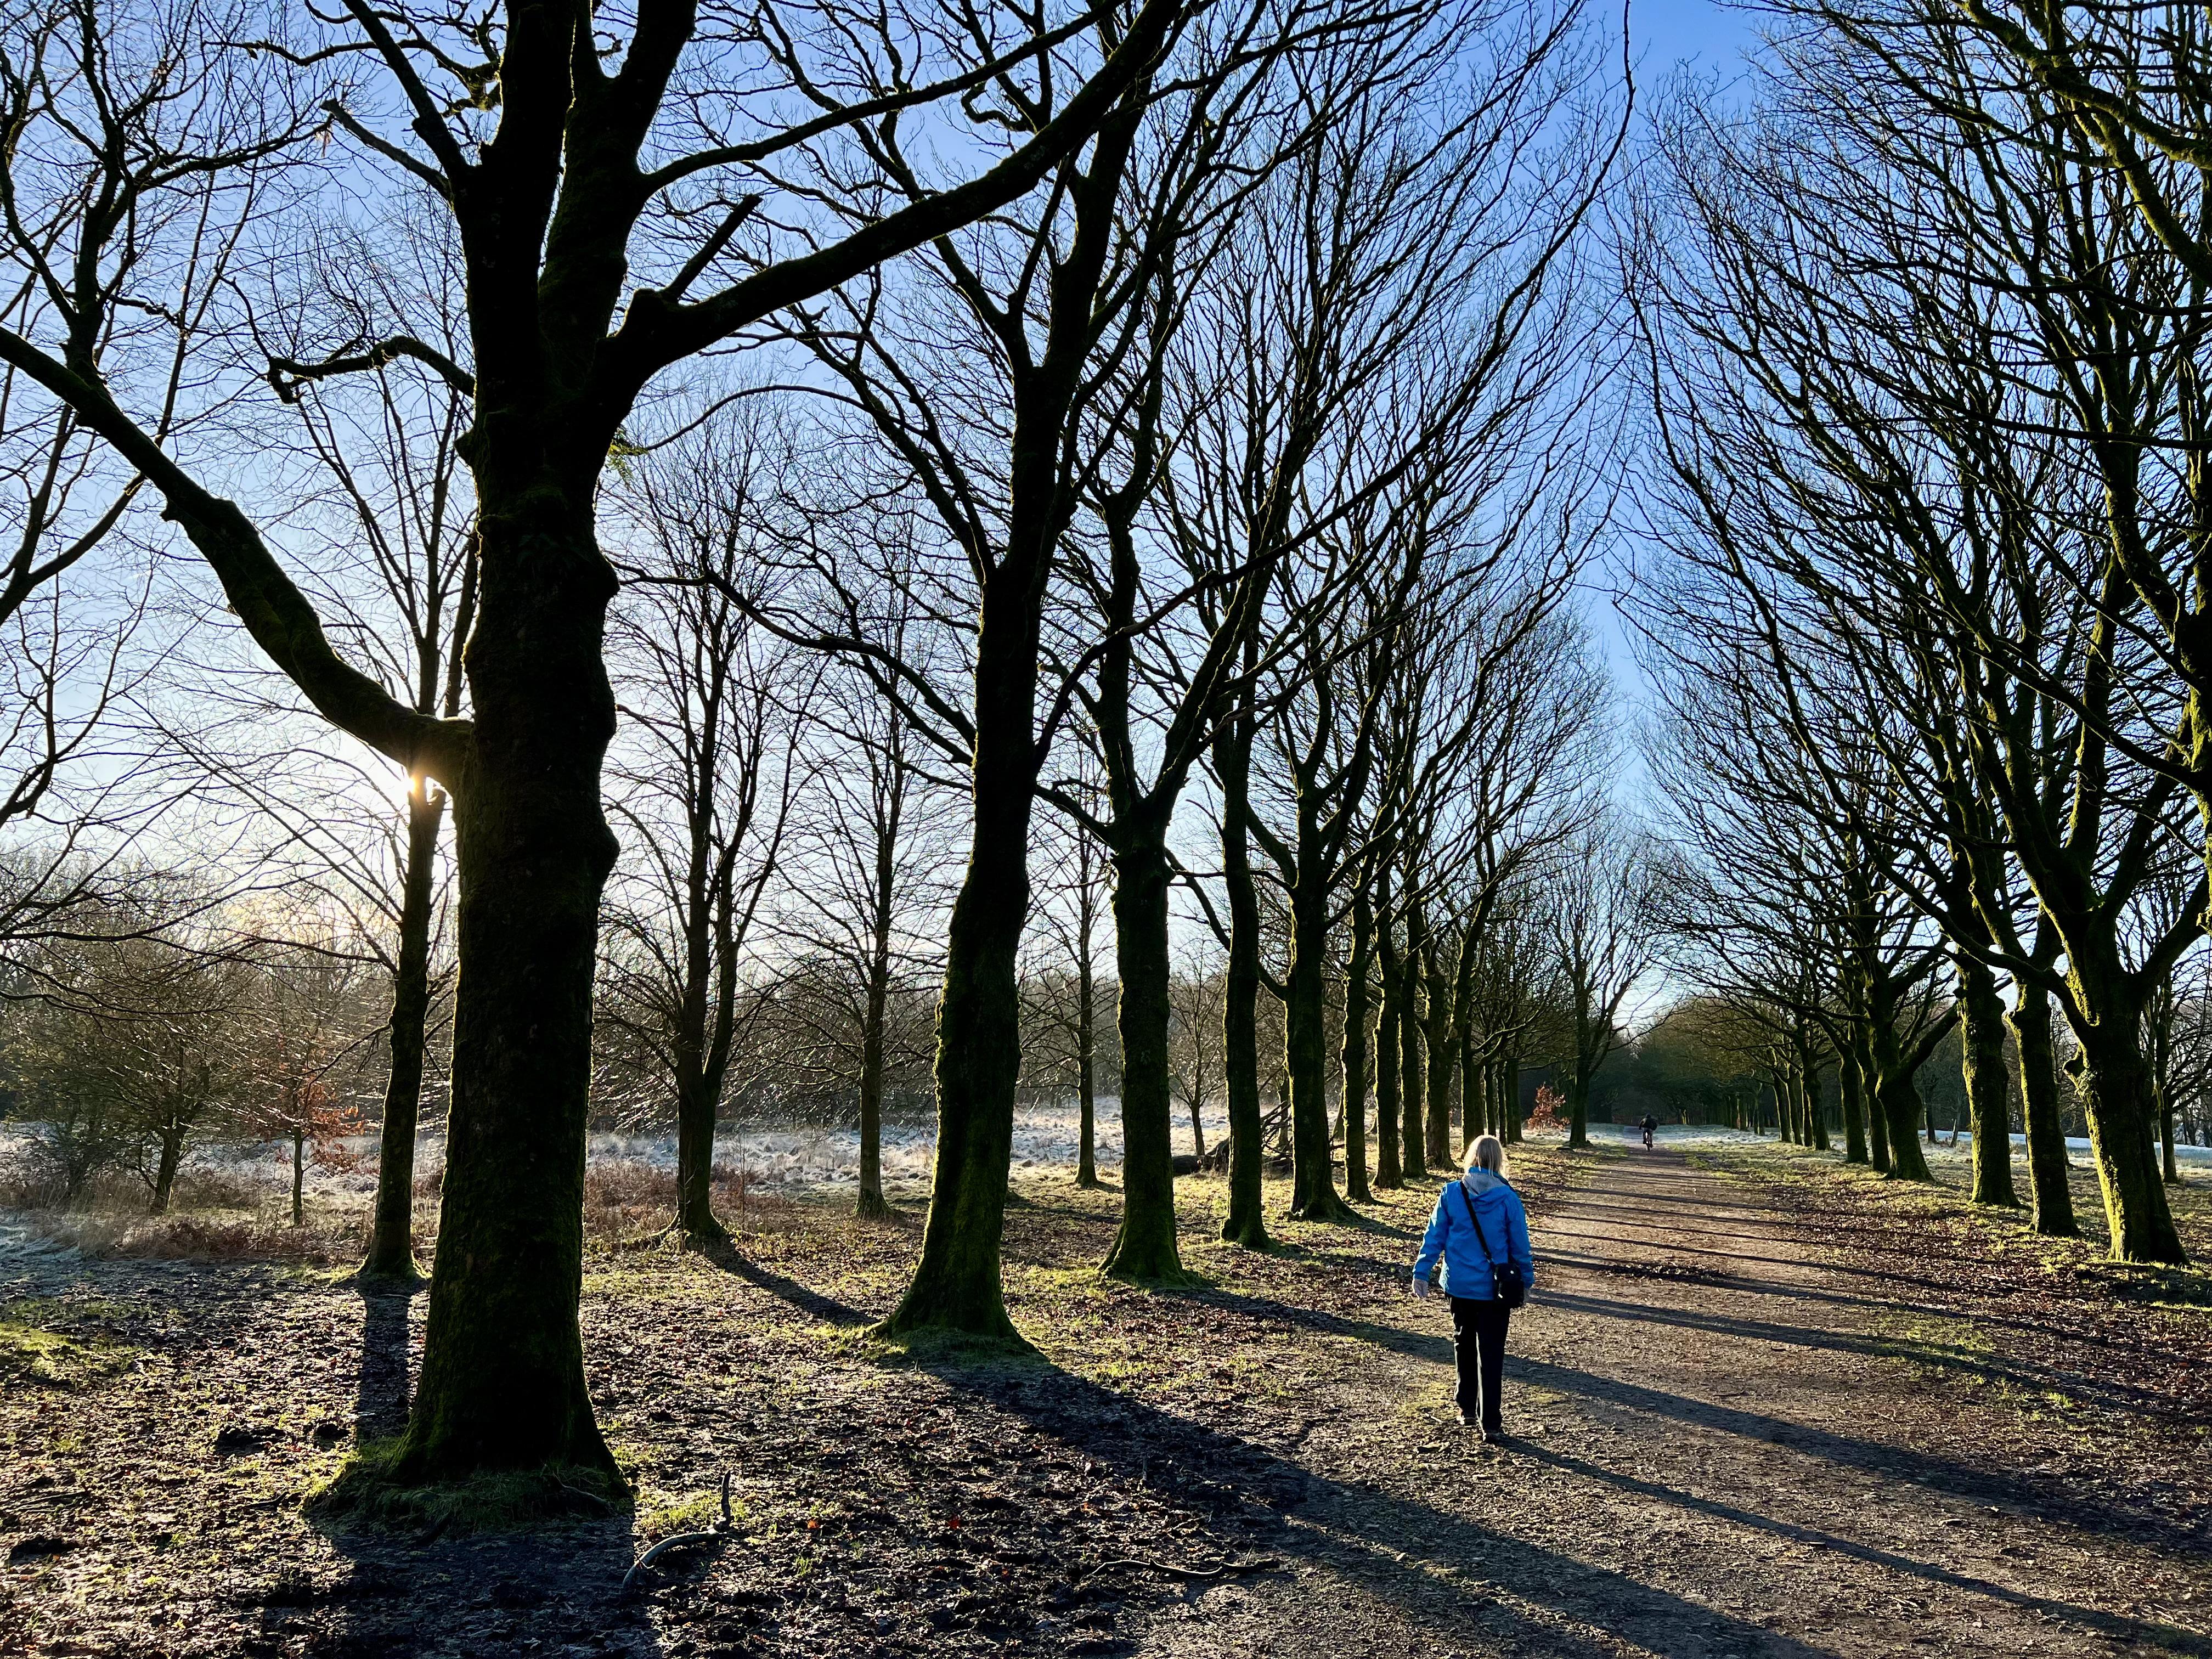 UK Weather: Sunny and frost at Rivington. Women walking down tree lined avenue at Rivington near Chorley in Lancashire (Alamy/PA)